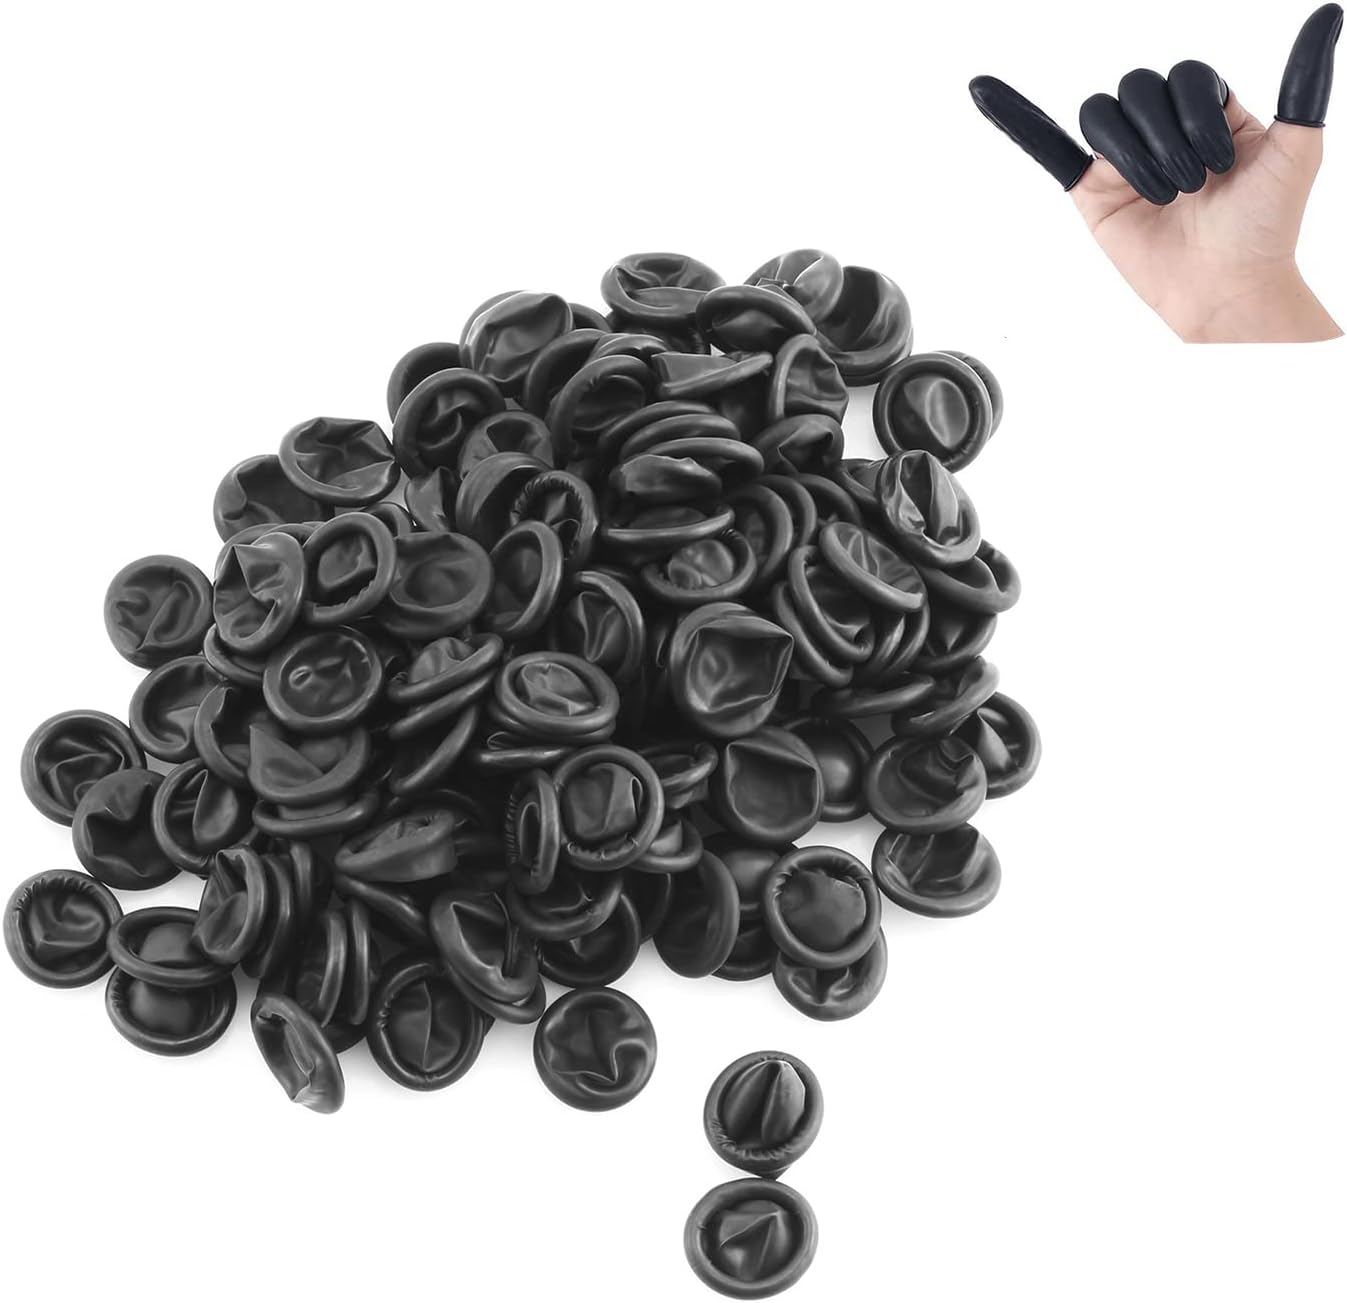 Lind Kitchen 150pcs Disposable Latex Finger Cots Protective Fingertips Gloves Rubber Industrial Fingerstall Sleeves 65mmx25mm (Black)